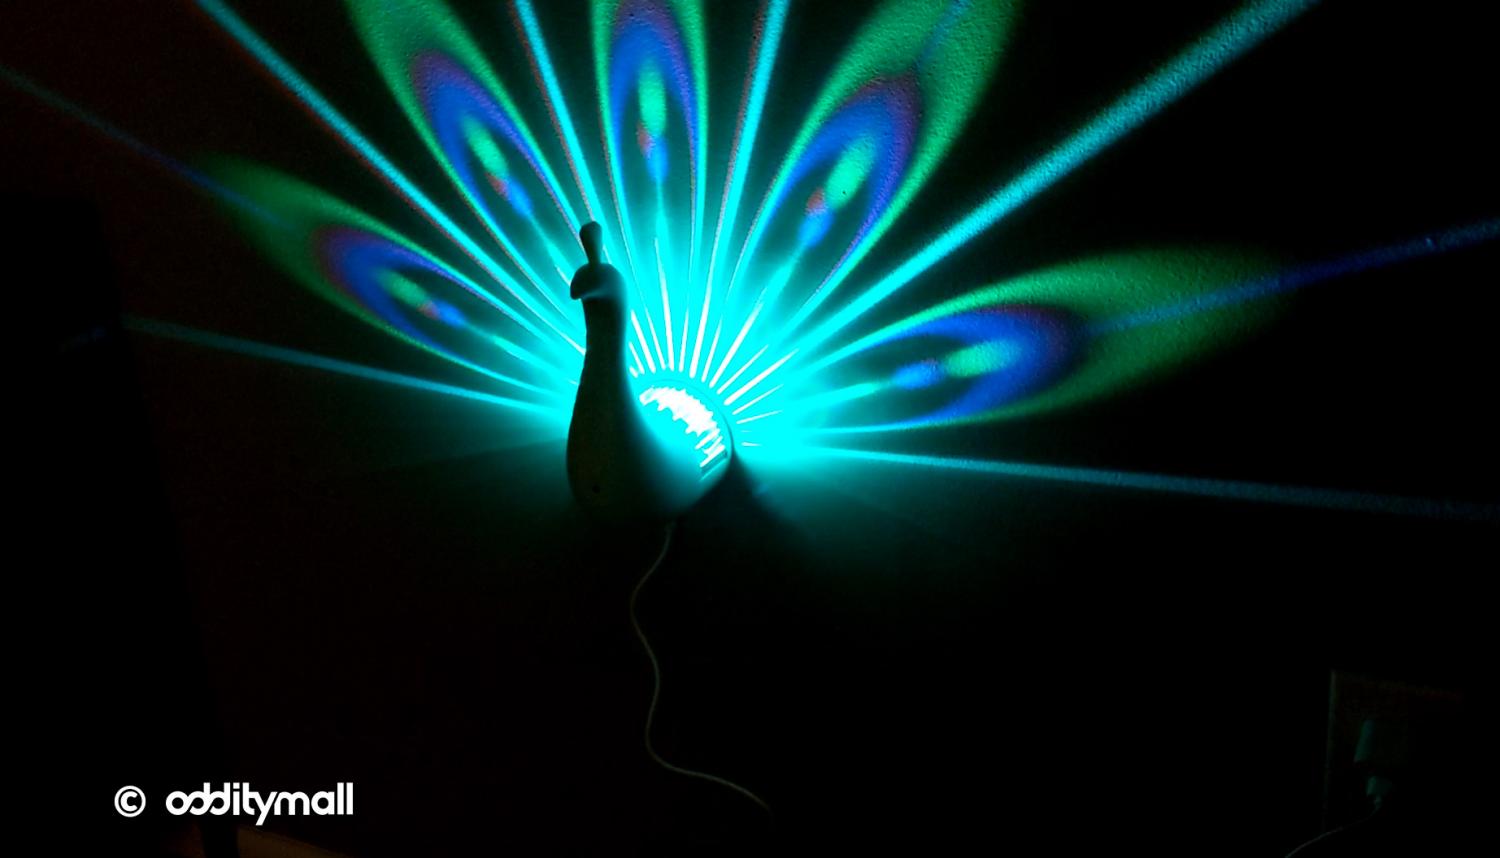 LED Peacock Night-Light Projects Its Colorful Plumage Onto Your Wall